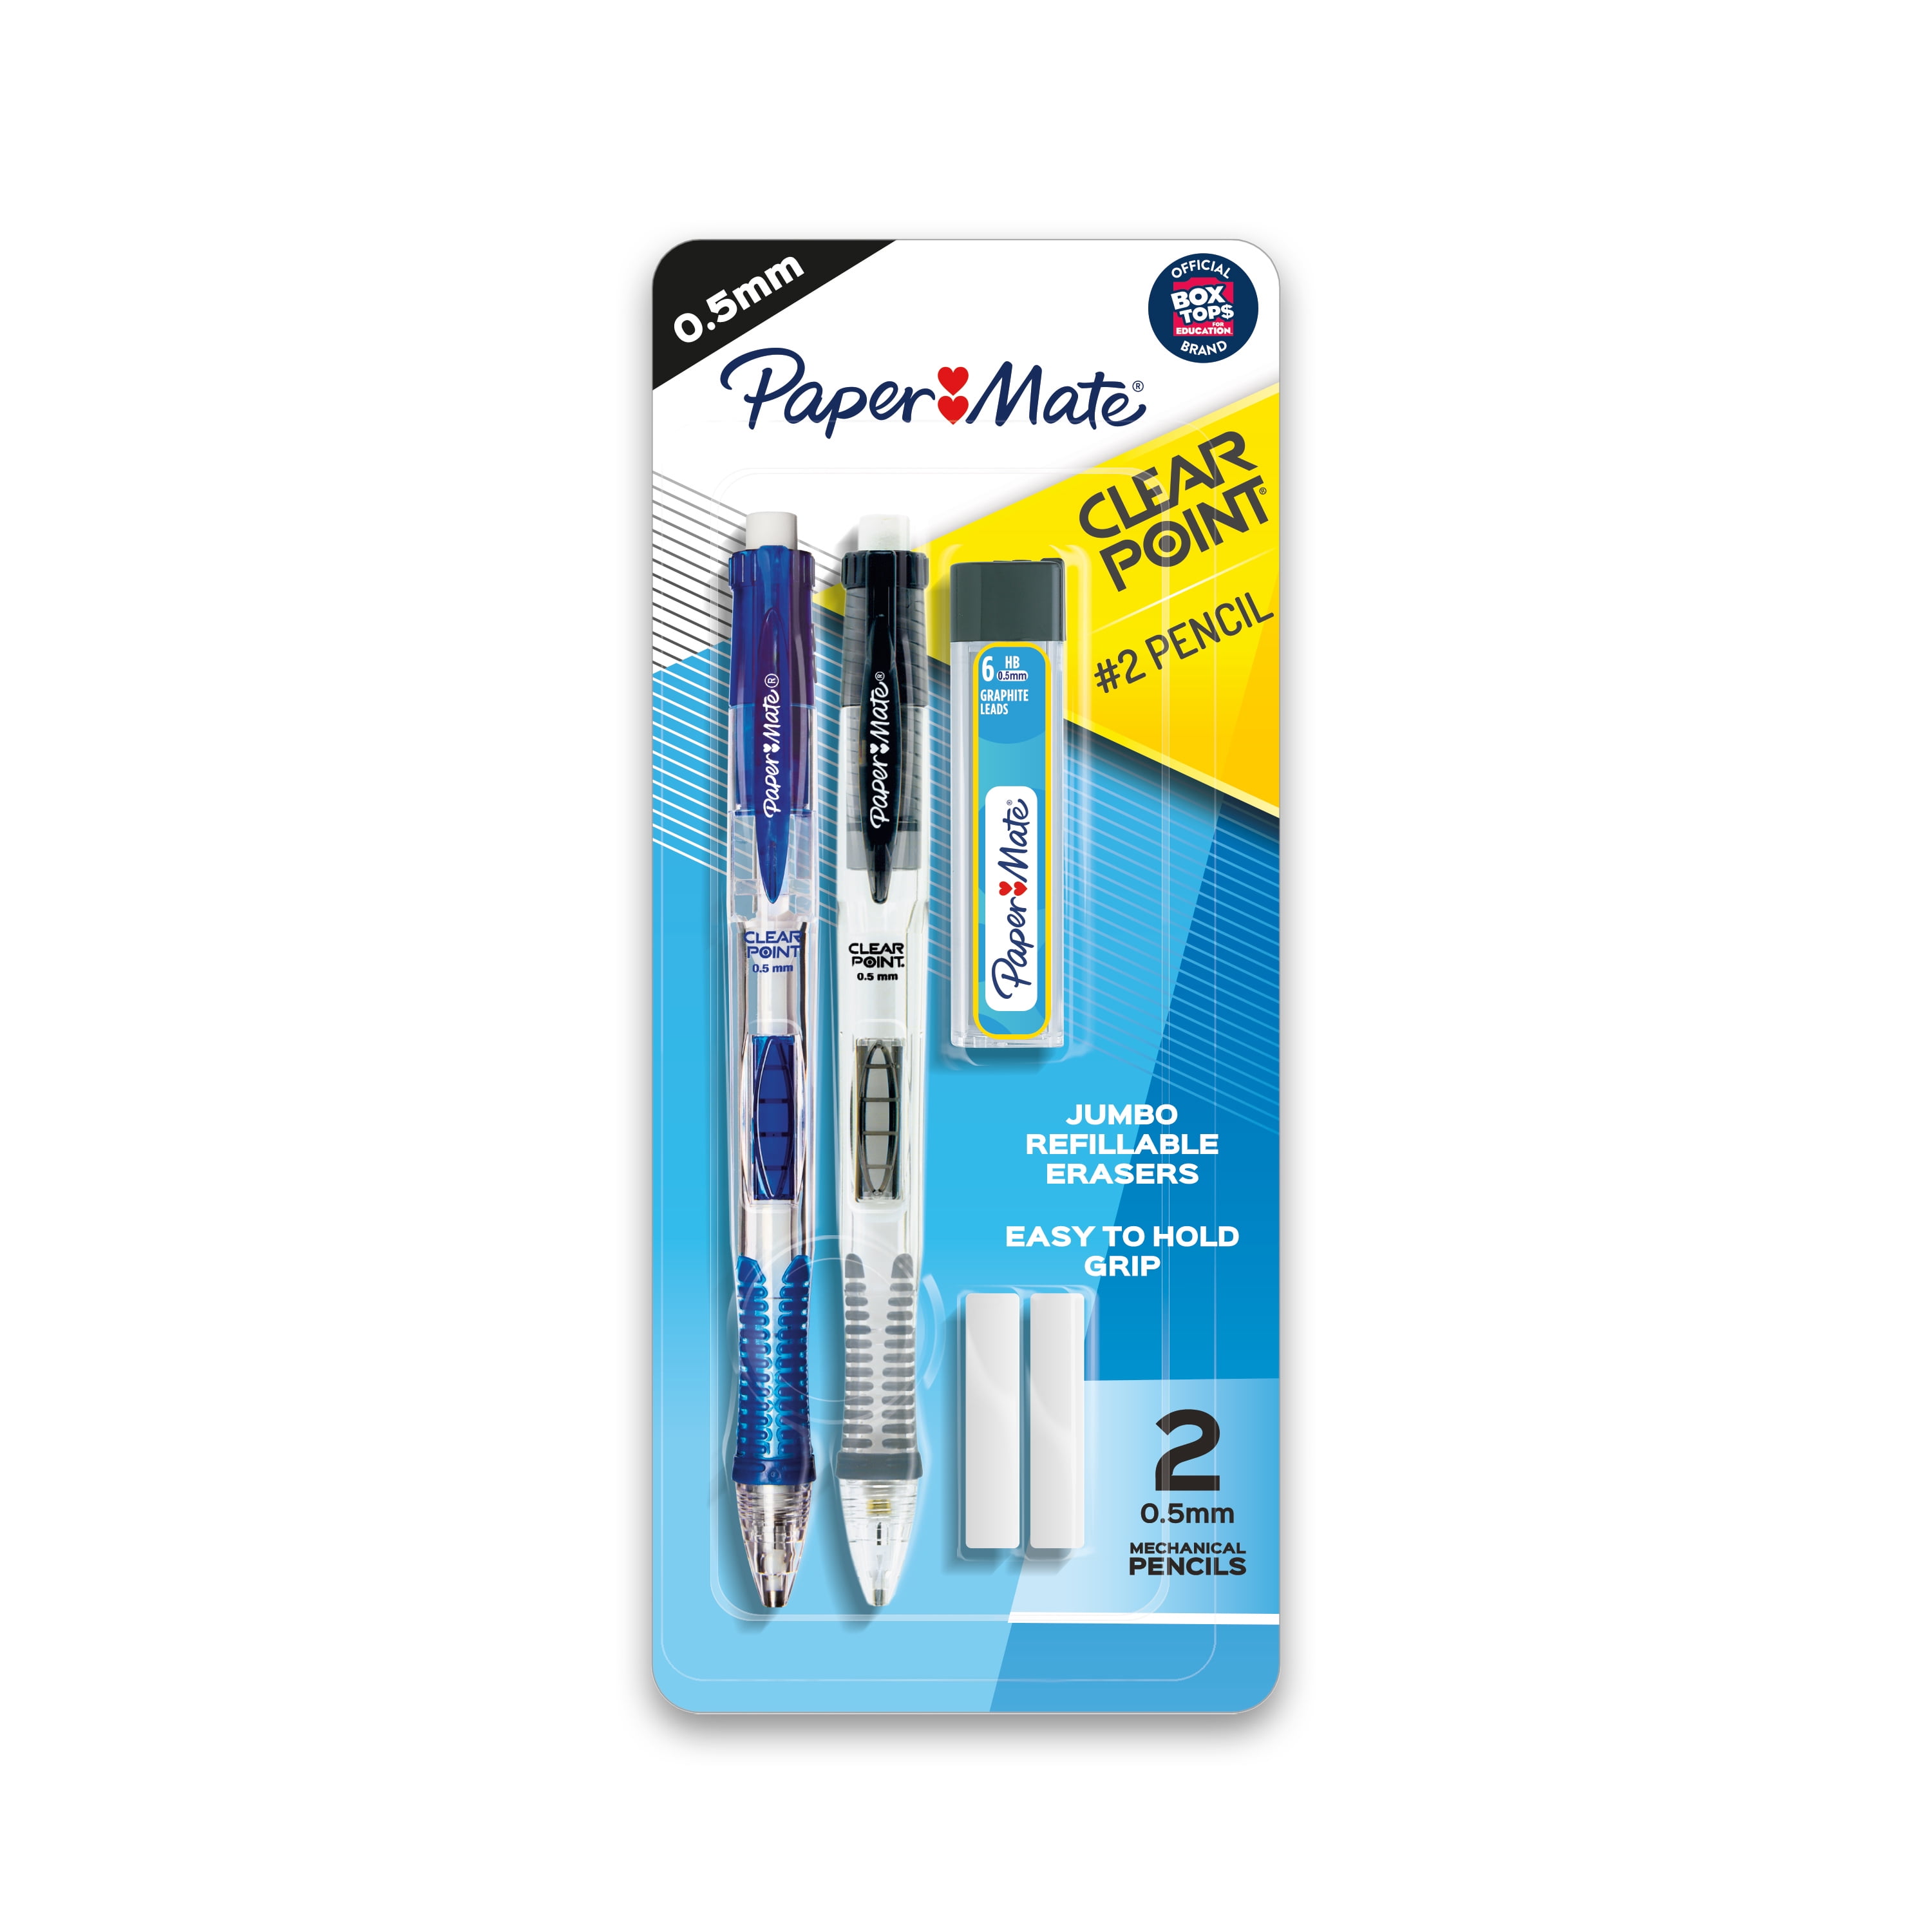 Quick Click Pop 0.7mm Pencil 4 Pack Assorted Color Set with Lead and 2 Eraser Refills